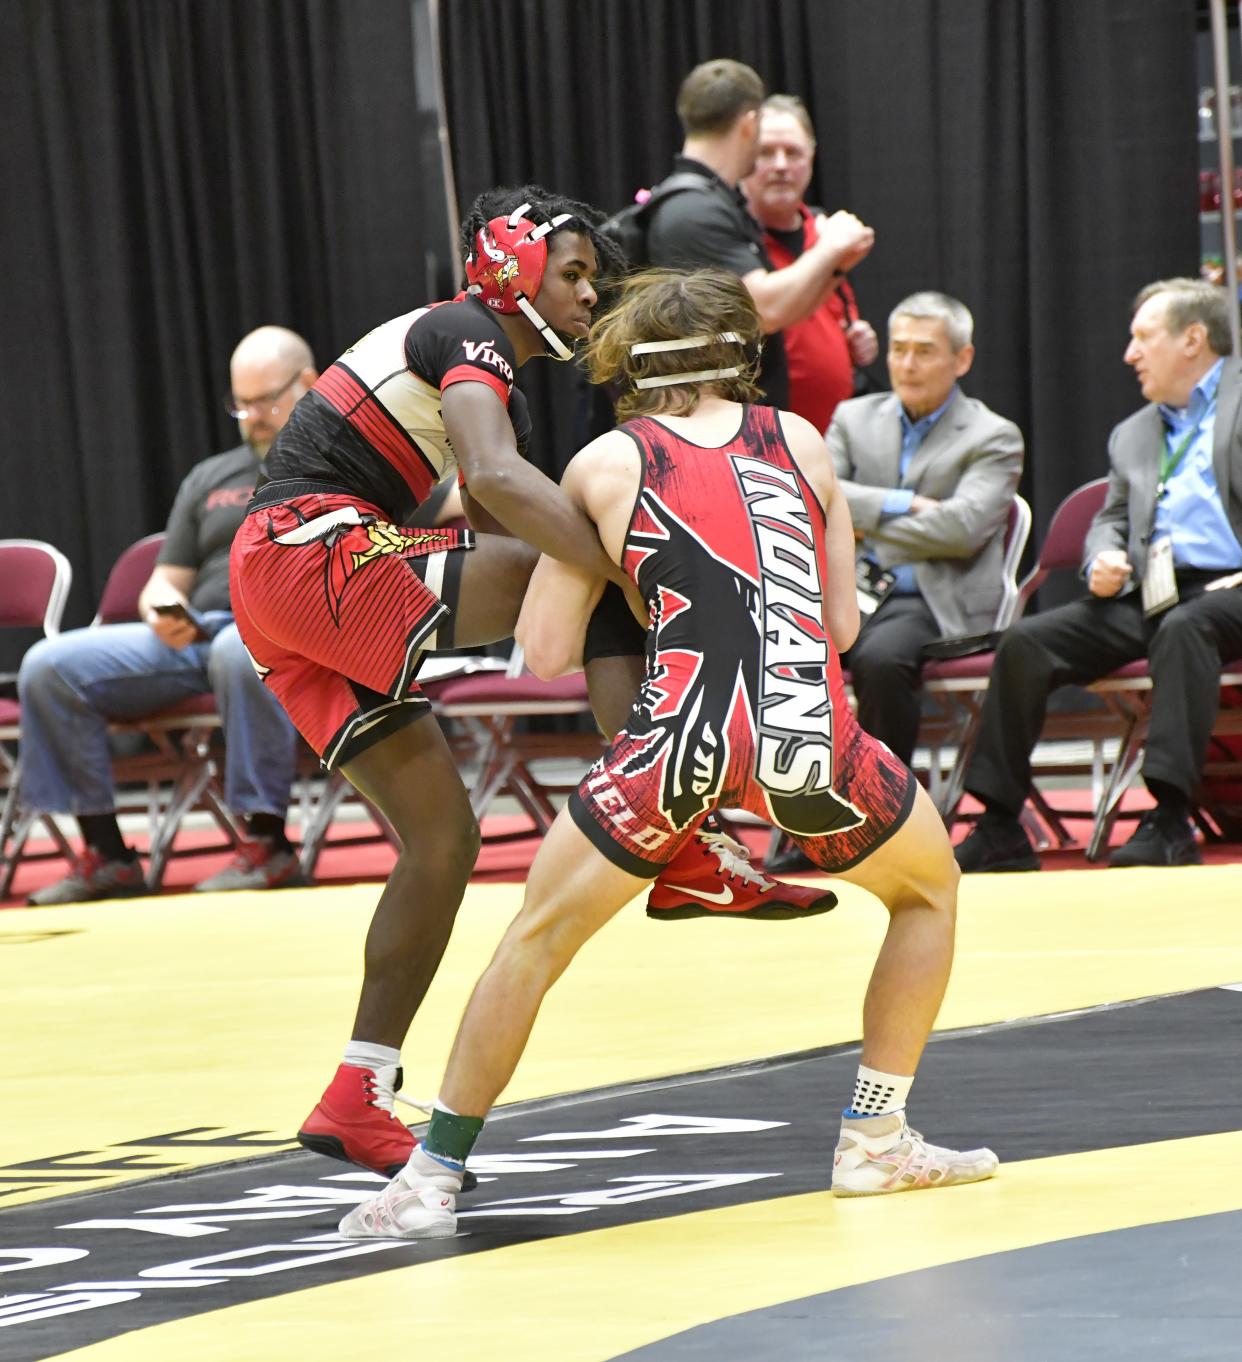 Princeton's Micah Cottrell (left) grapples in the Division I 138-pound consolation round at the OHSAA 86th annual boys wrestling state tournament March 10-12, 2023.